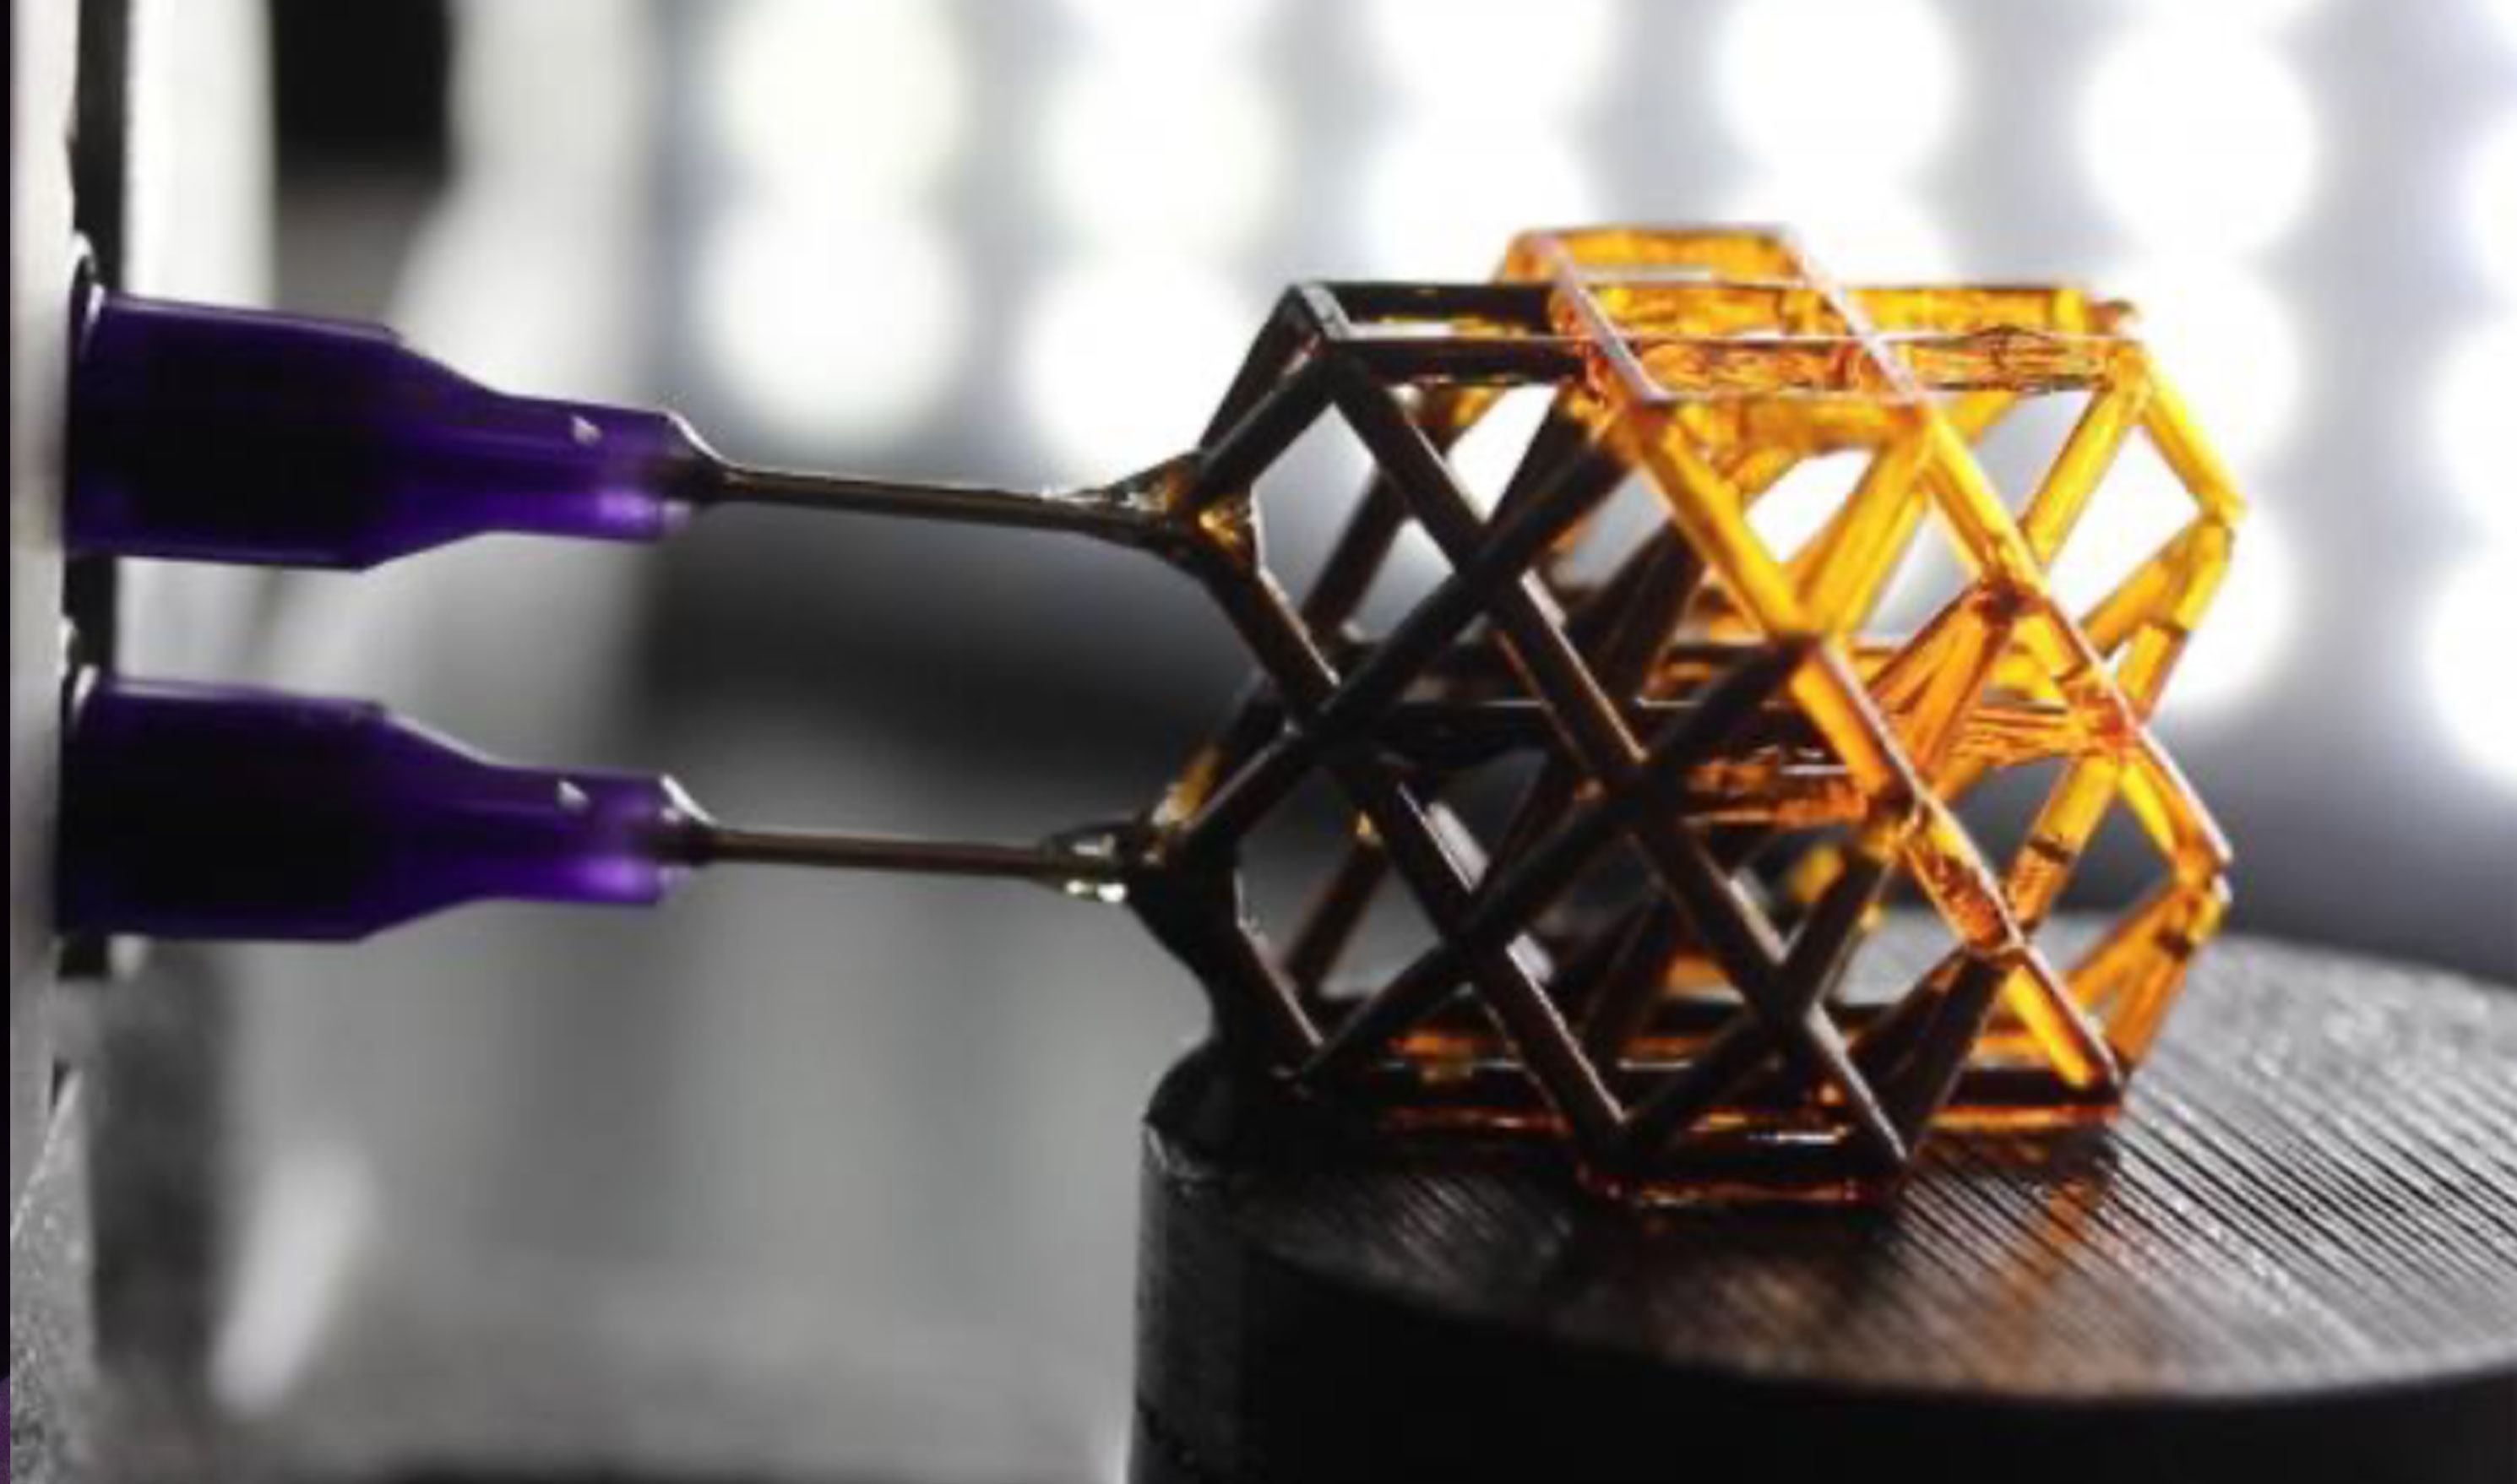 A 3D-printed hierarchical lattice glows lavender against a dark background